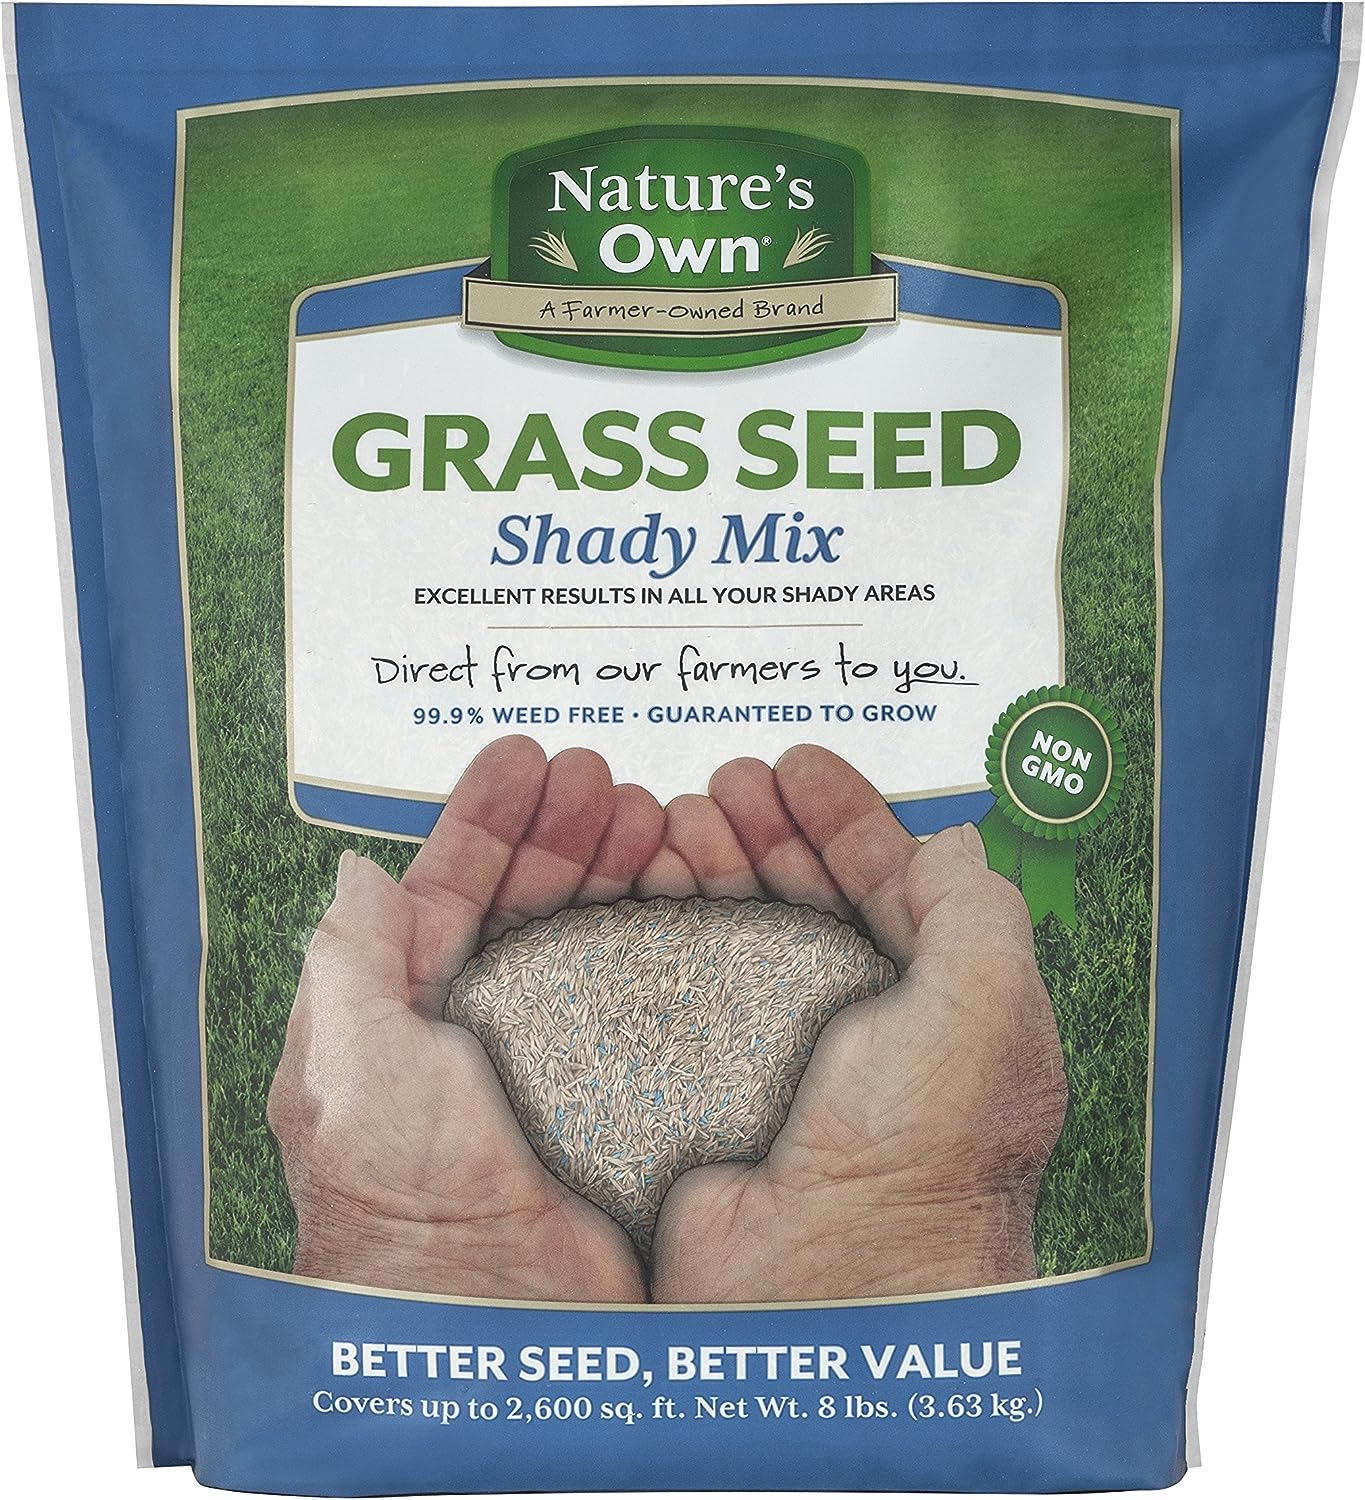 Mountain View Seeds Natures Own Shady Mix Grass Seed, [...]